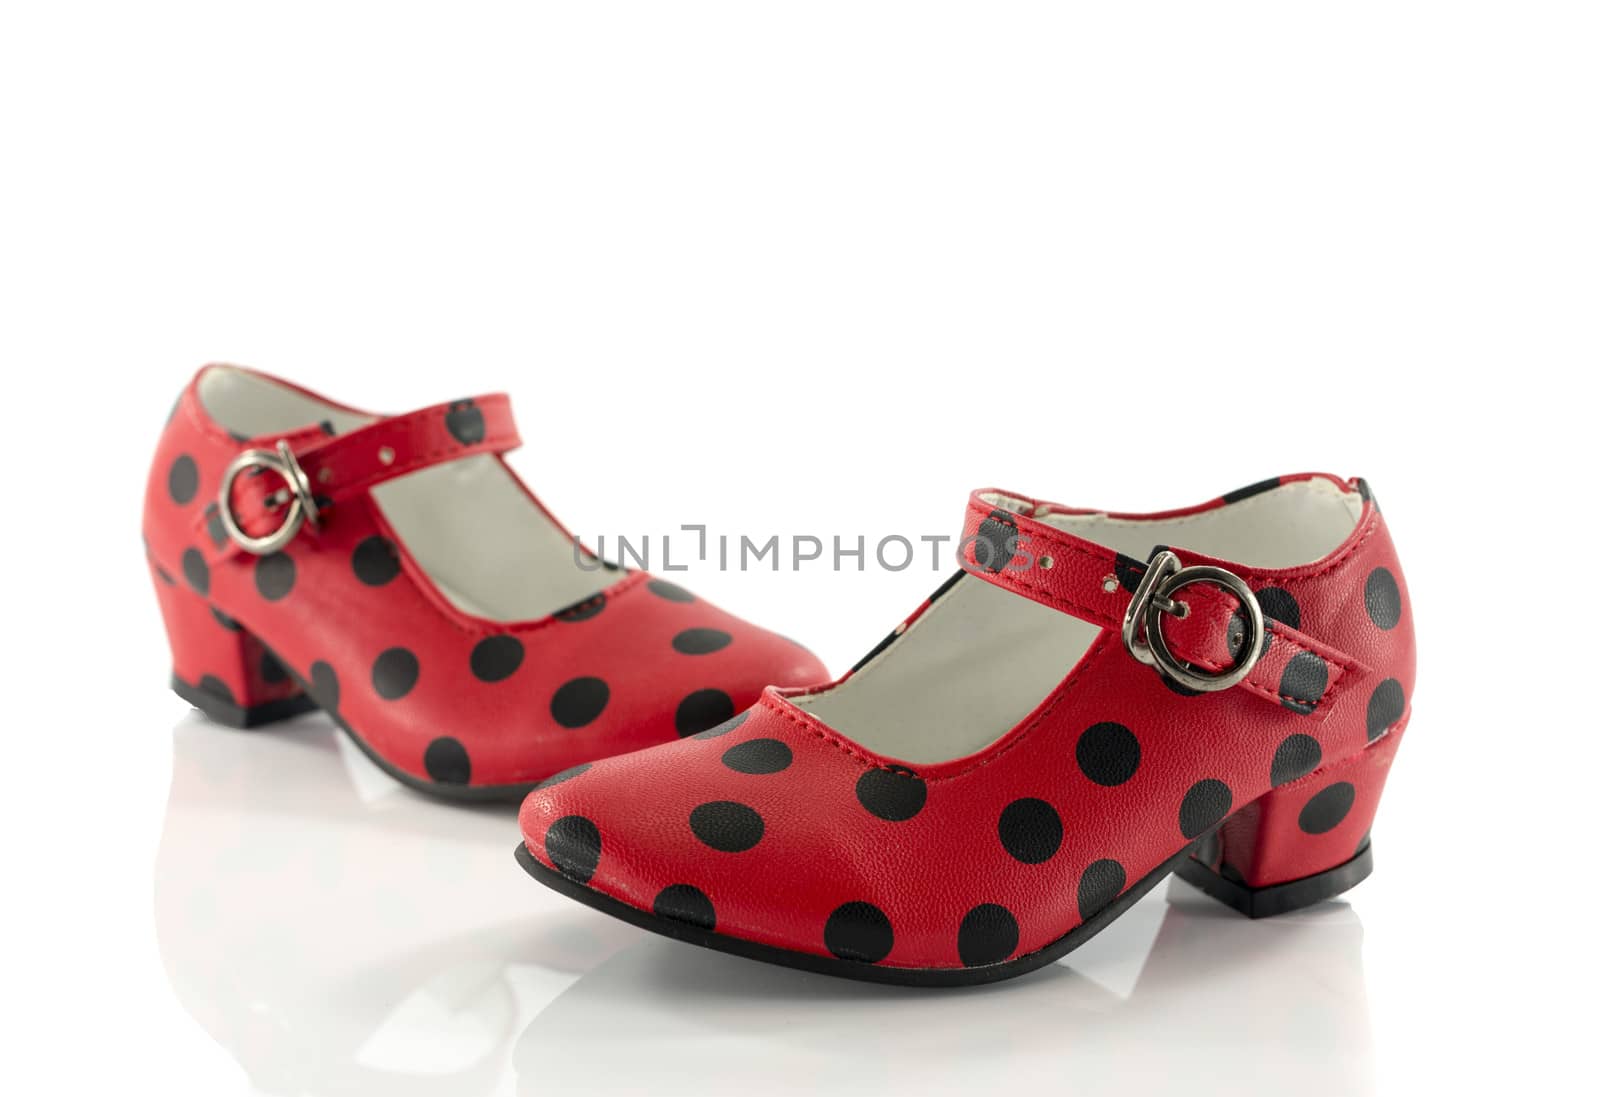 pair red shoes from back with black dots  by compuinfoto